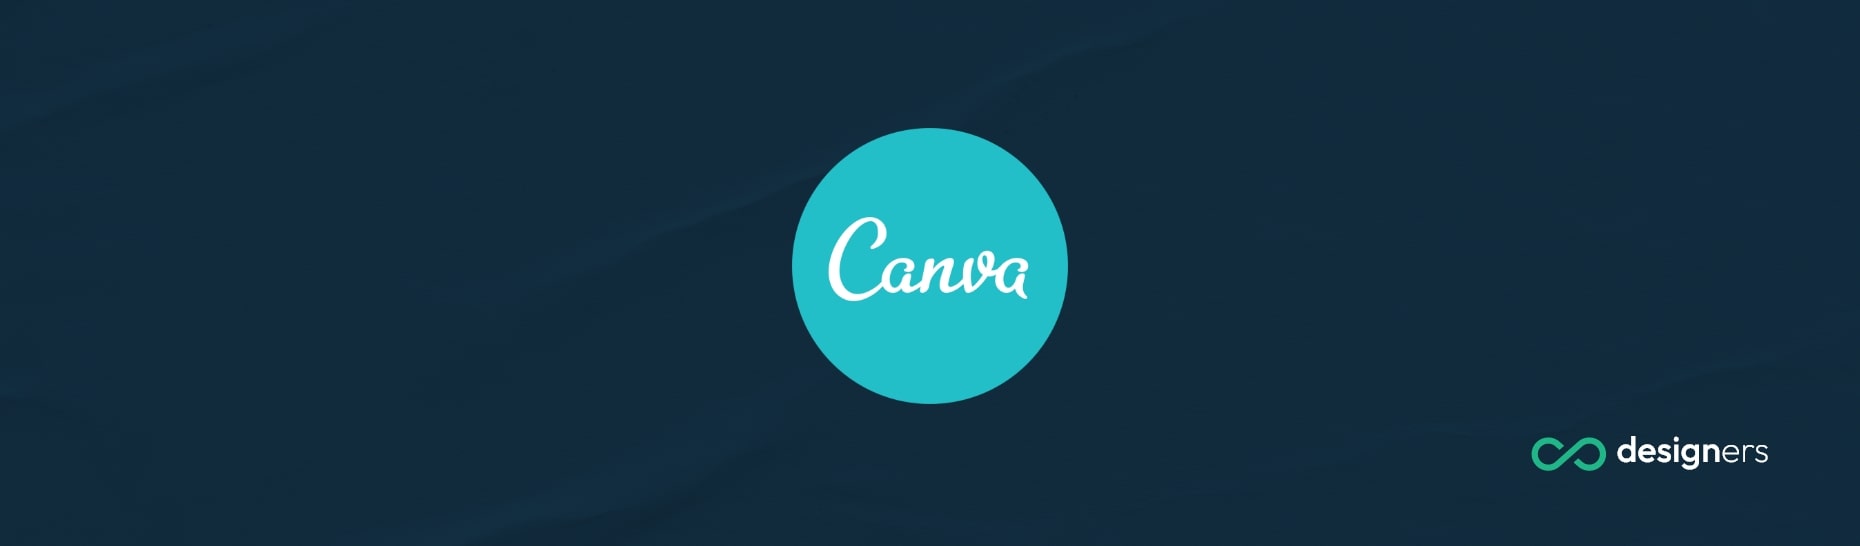 Are Canva Graphics Royalty Free?